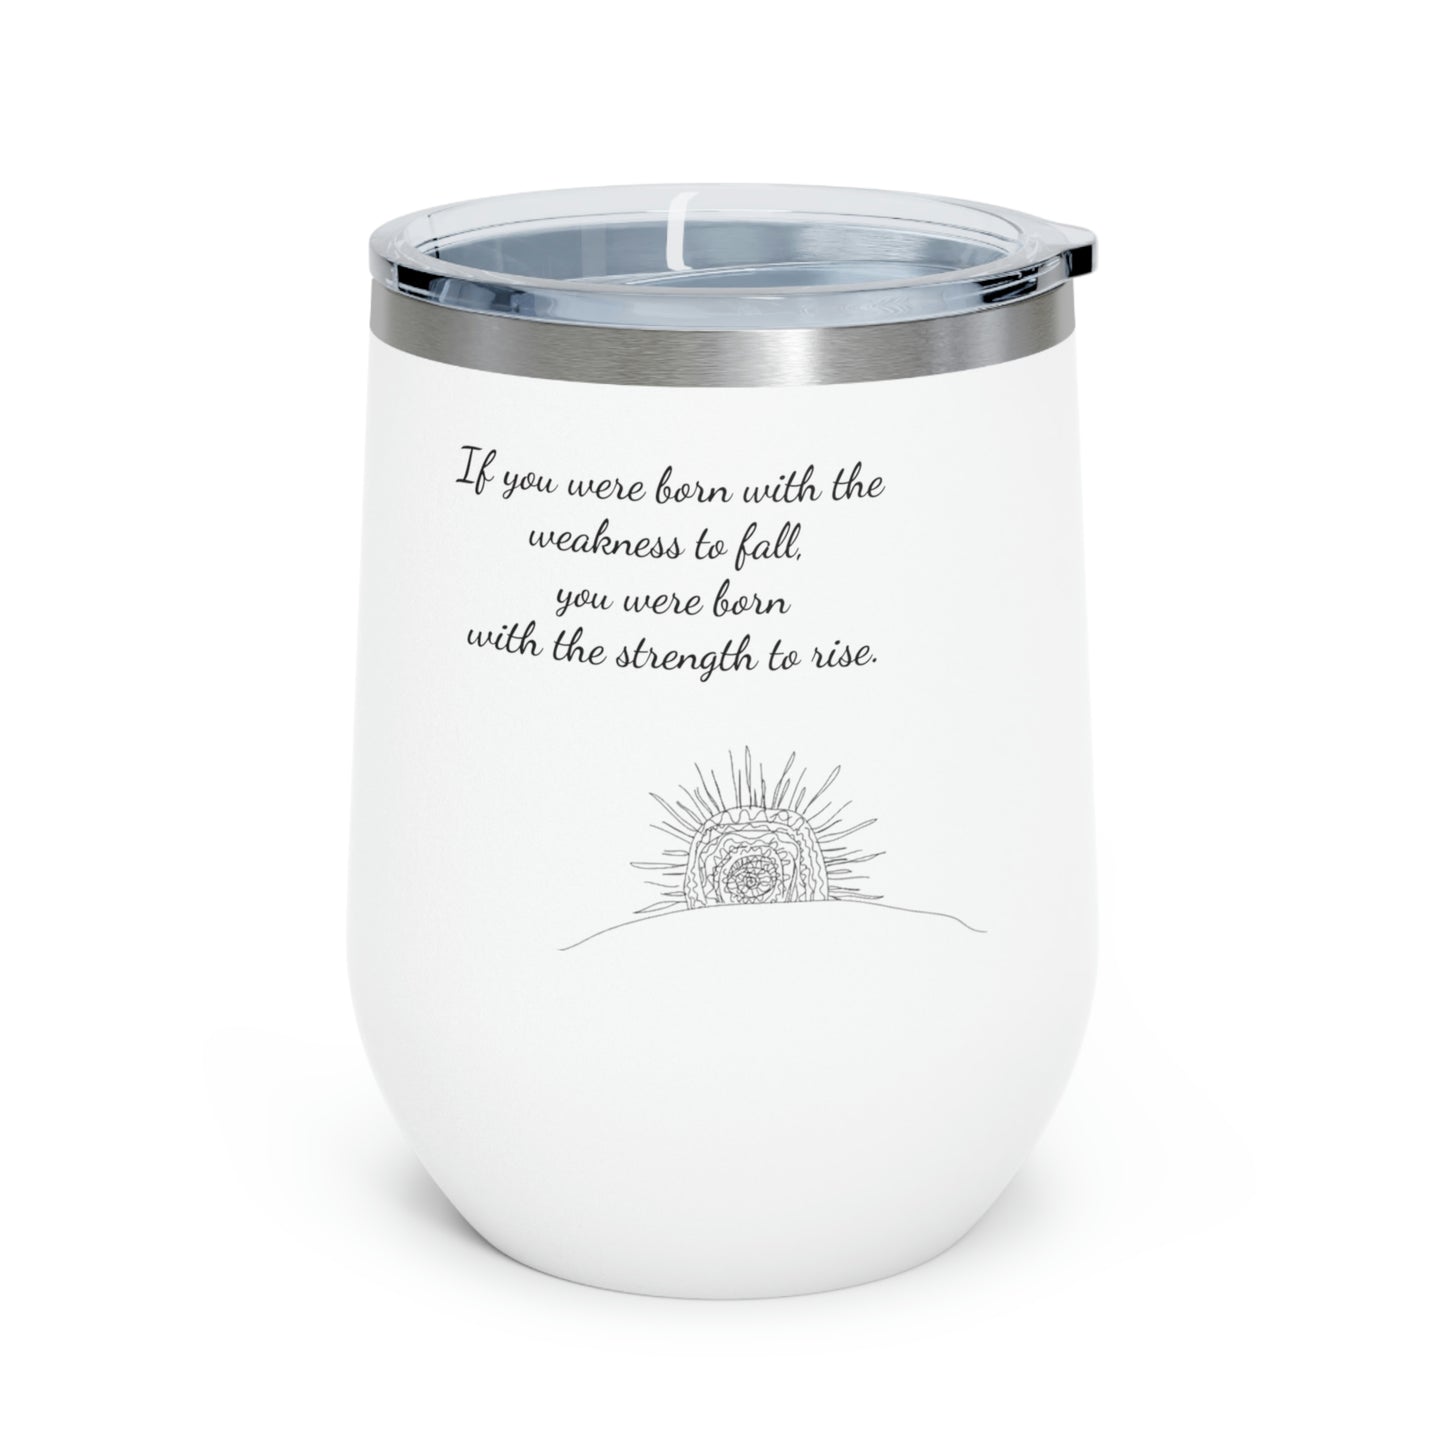 If you were born with the weakness to fall...12oz Insulated Wine Tumbler